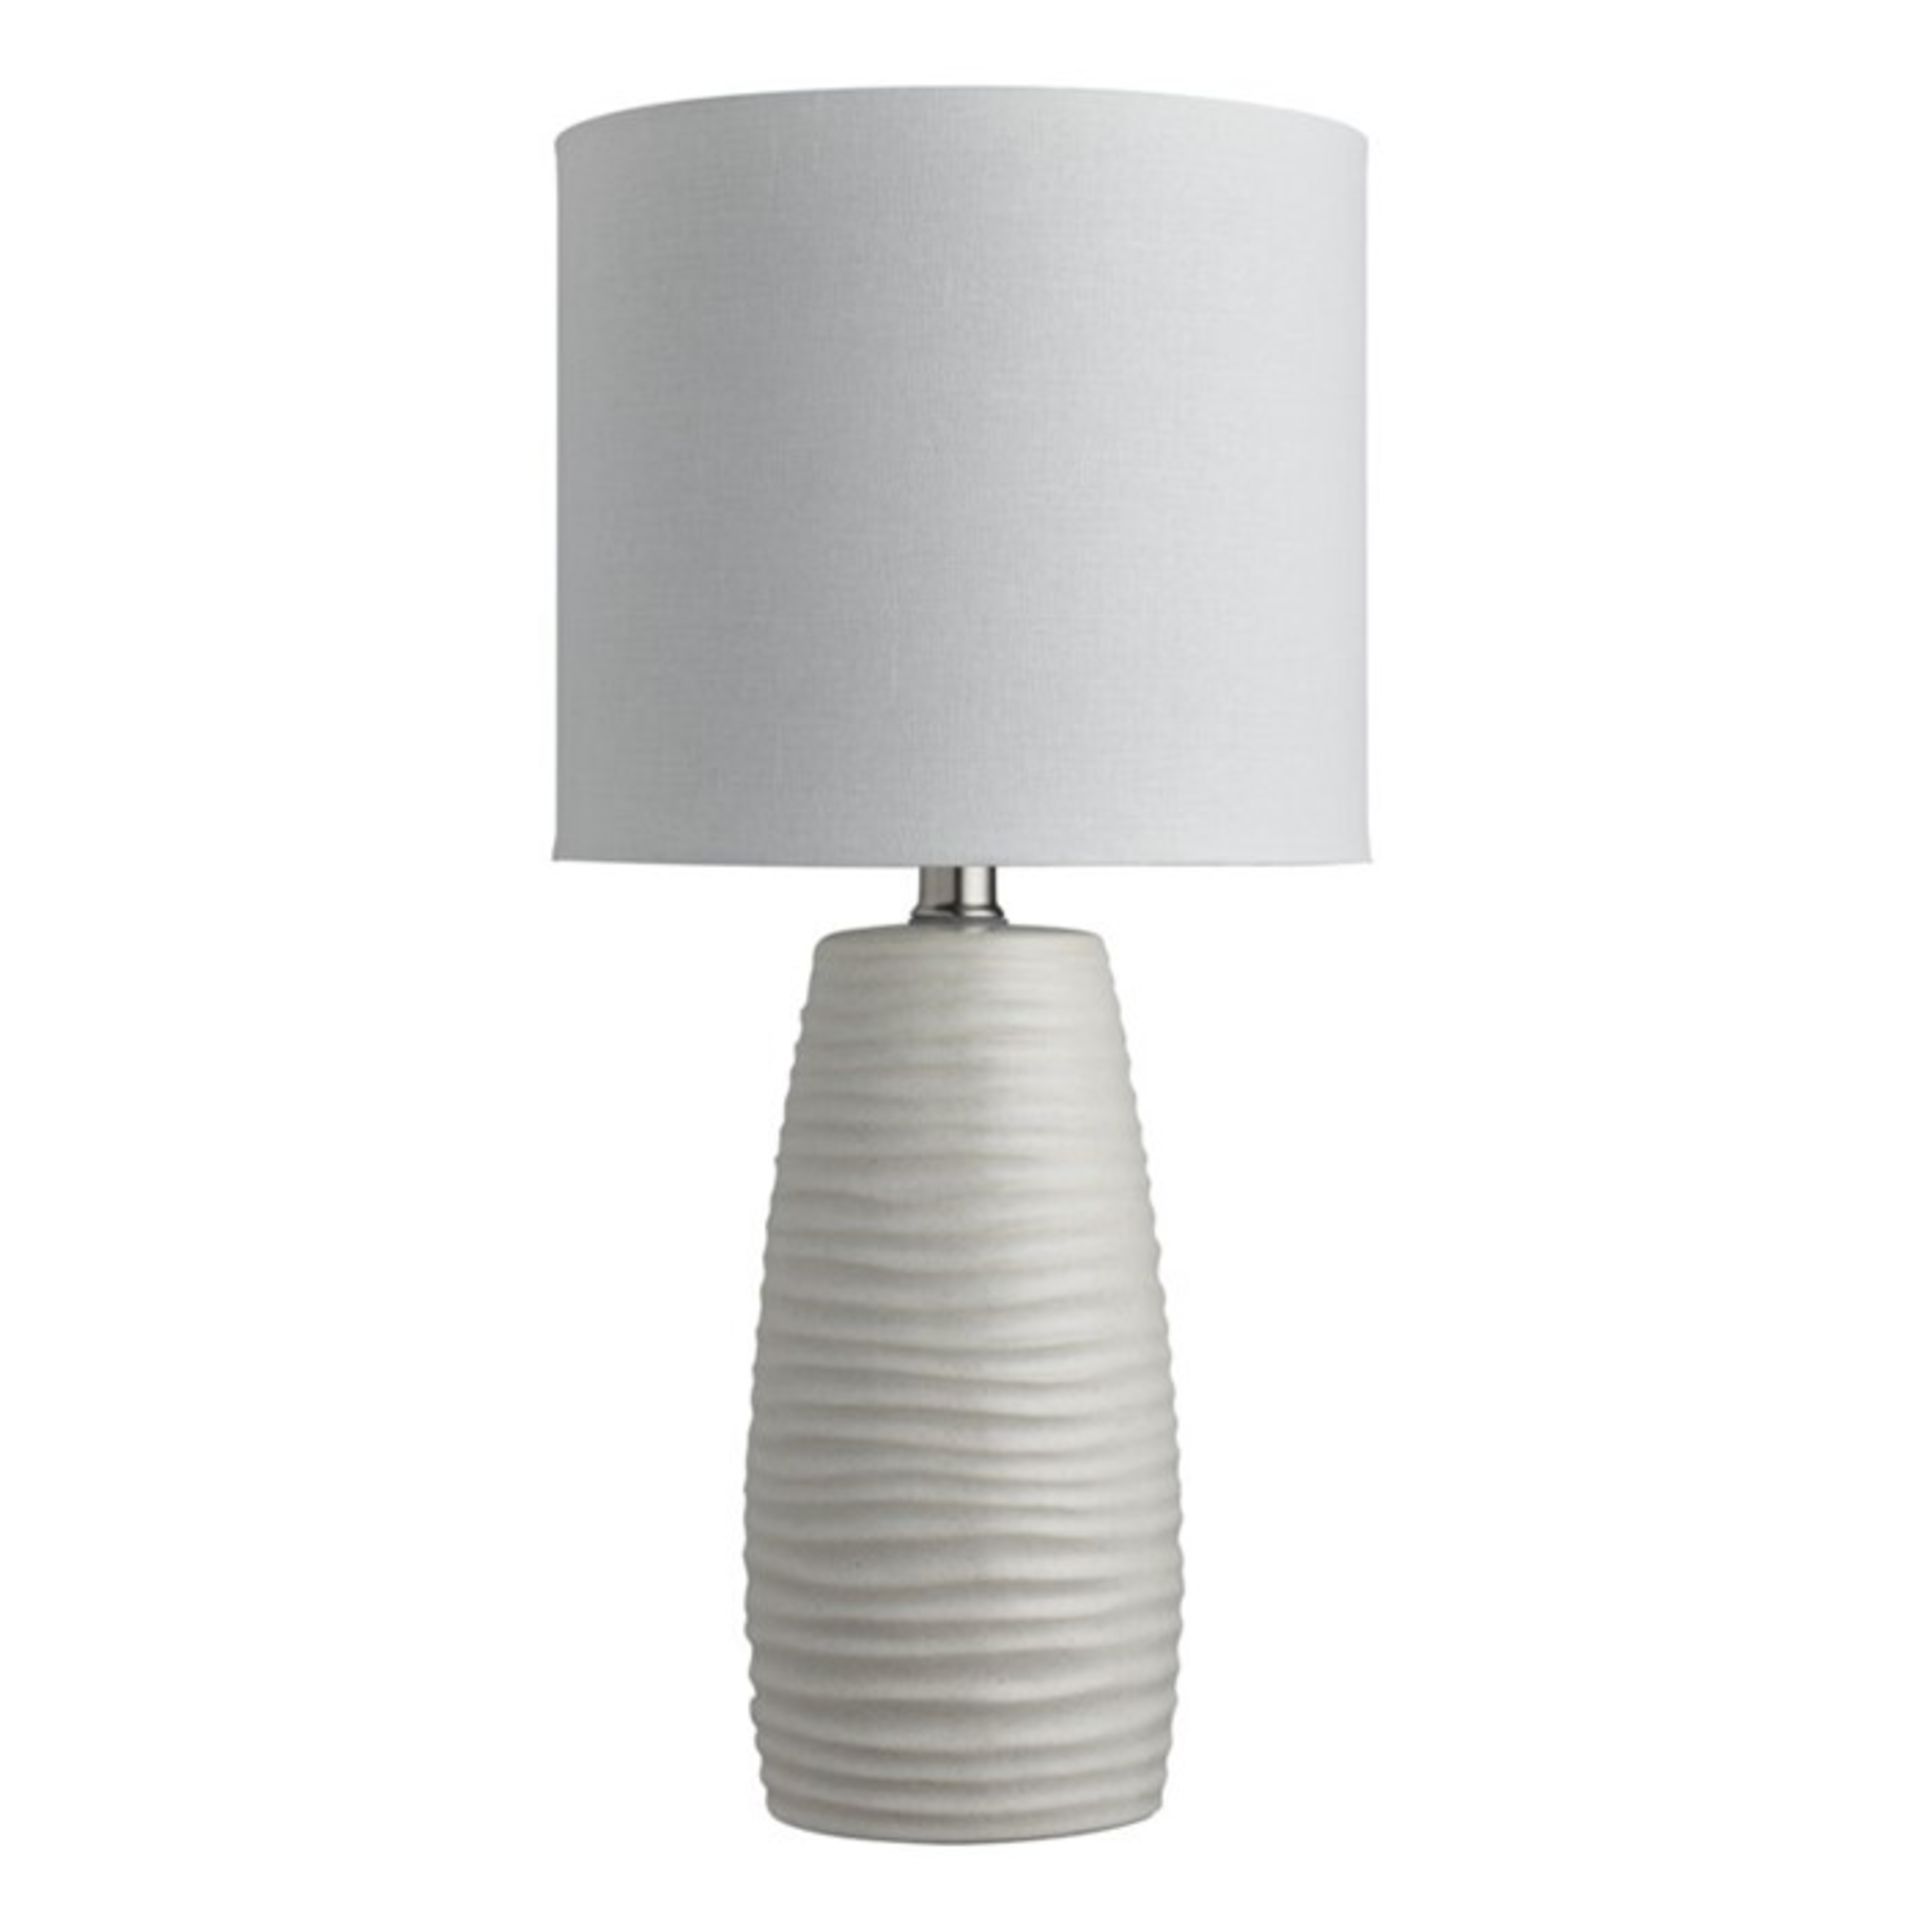 Marlow Home Co., Eanes 48cm Table Lamp - RRP £35.99 (GOME1025 - 20321/38) 3D